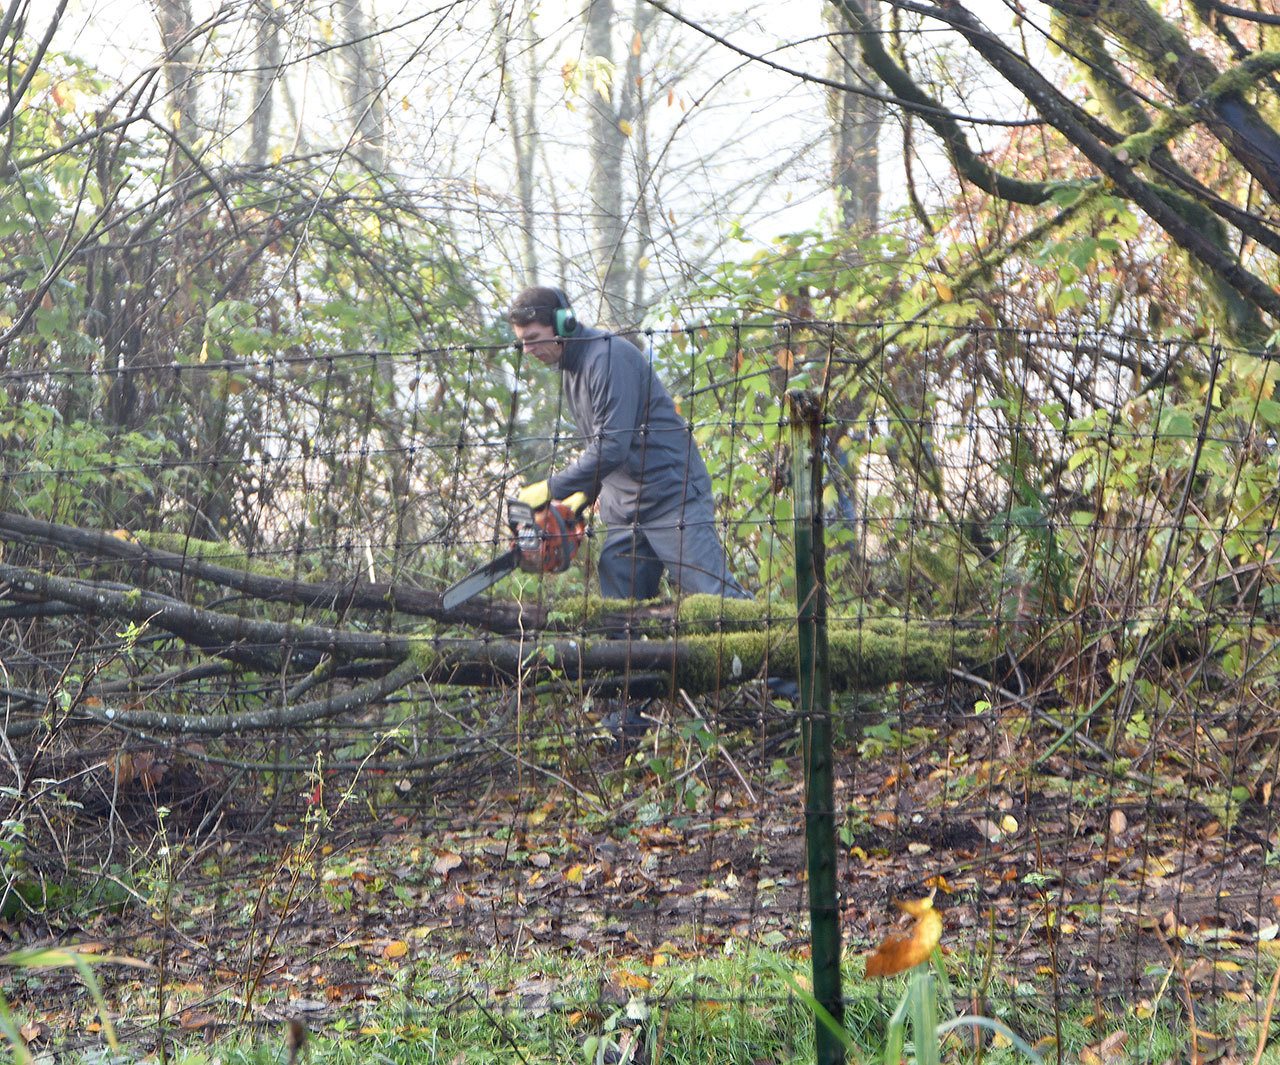 A searcher uses a chainsaw to clear brush from an area near Duvall, where King County detectives searched Thursday morning for remains of a victim of the Green River Killer. The Duvall location was one of the sites convicted Green River Killer Gary Ridgway said he might have used to dispose of his victims’ bodies. Nothing was found during the search.                                Carol Ladwig/Staff Photo